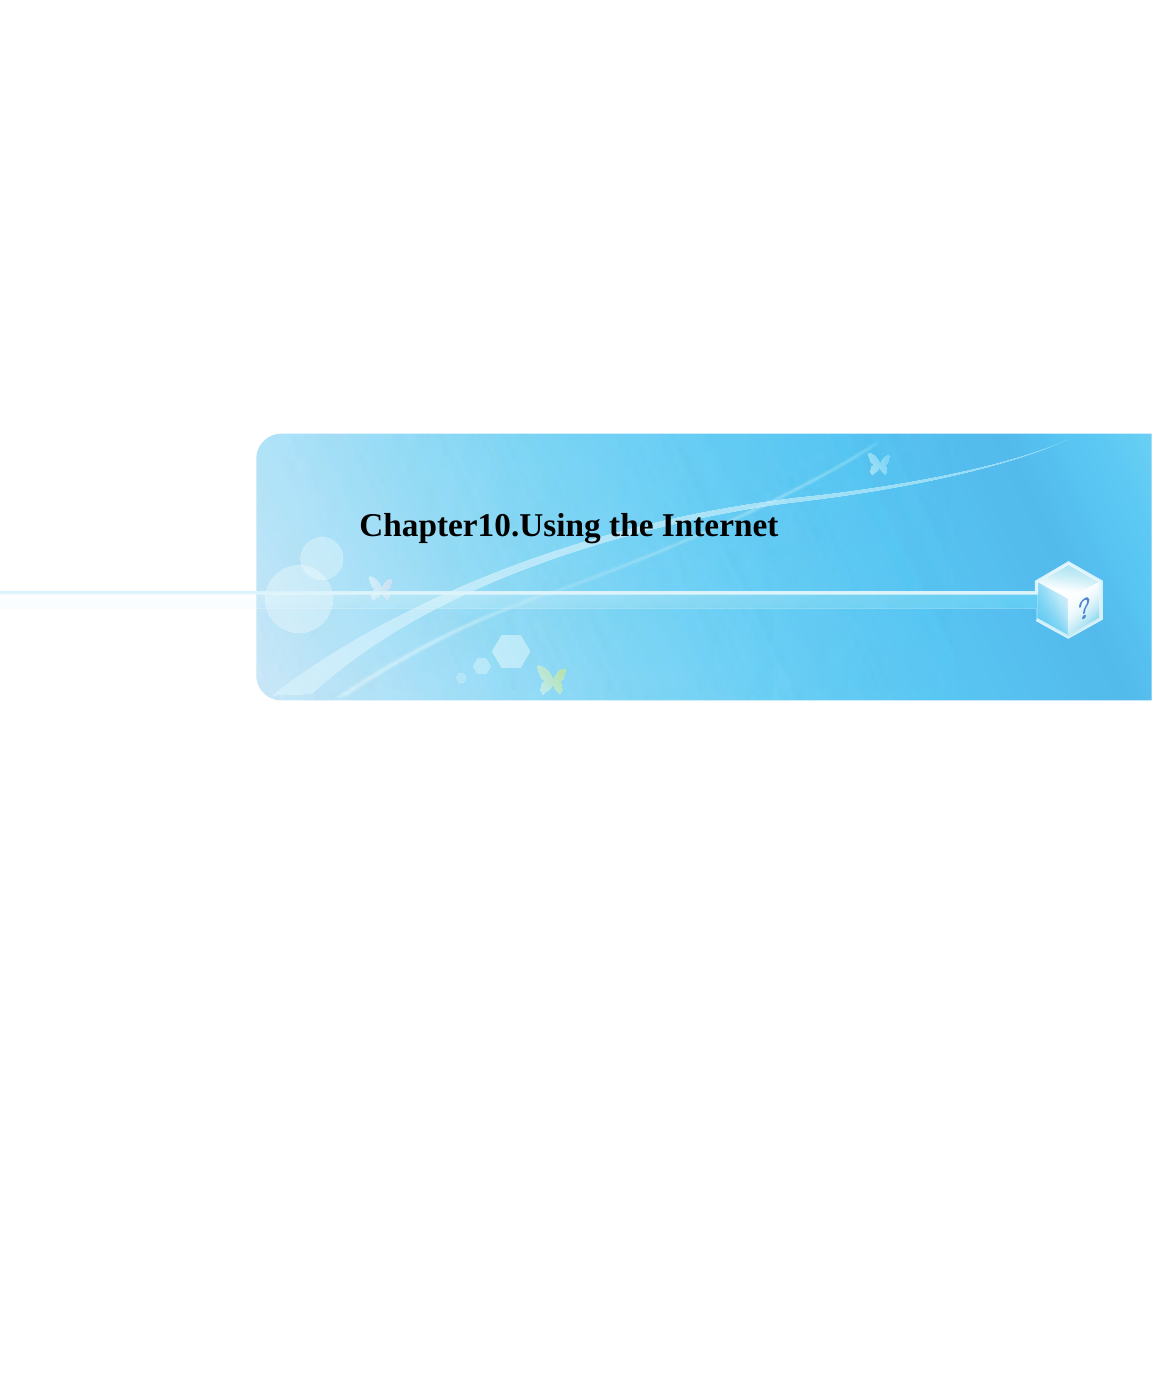 Chapter10.Using the Internet